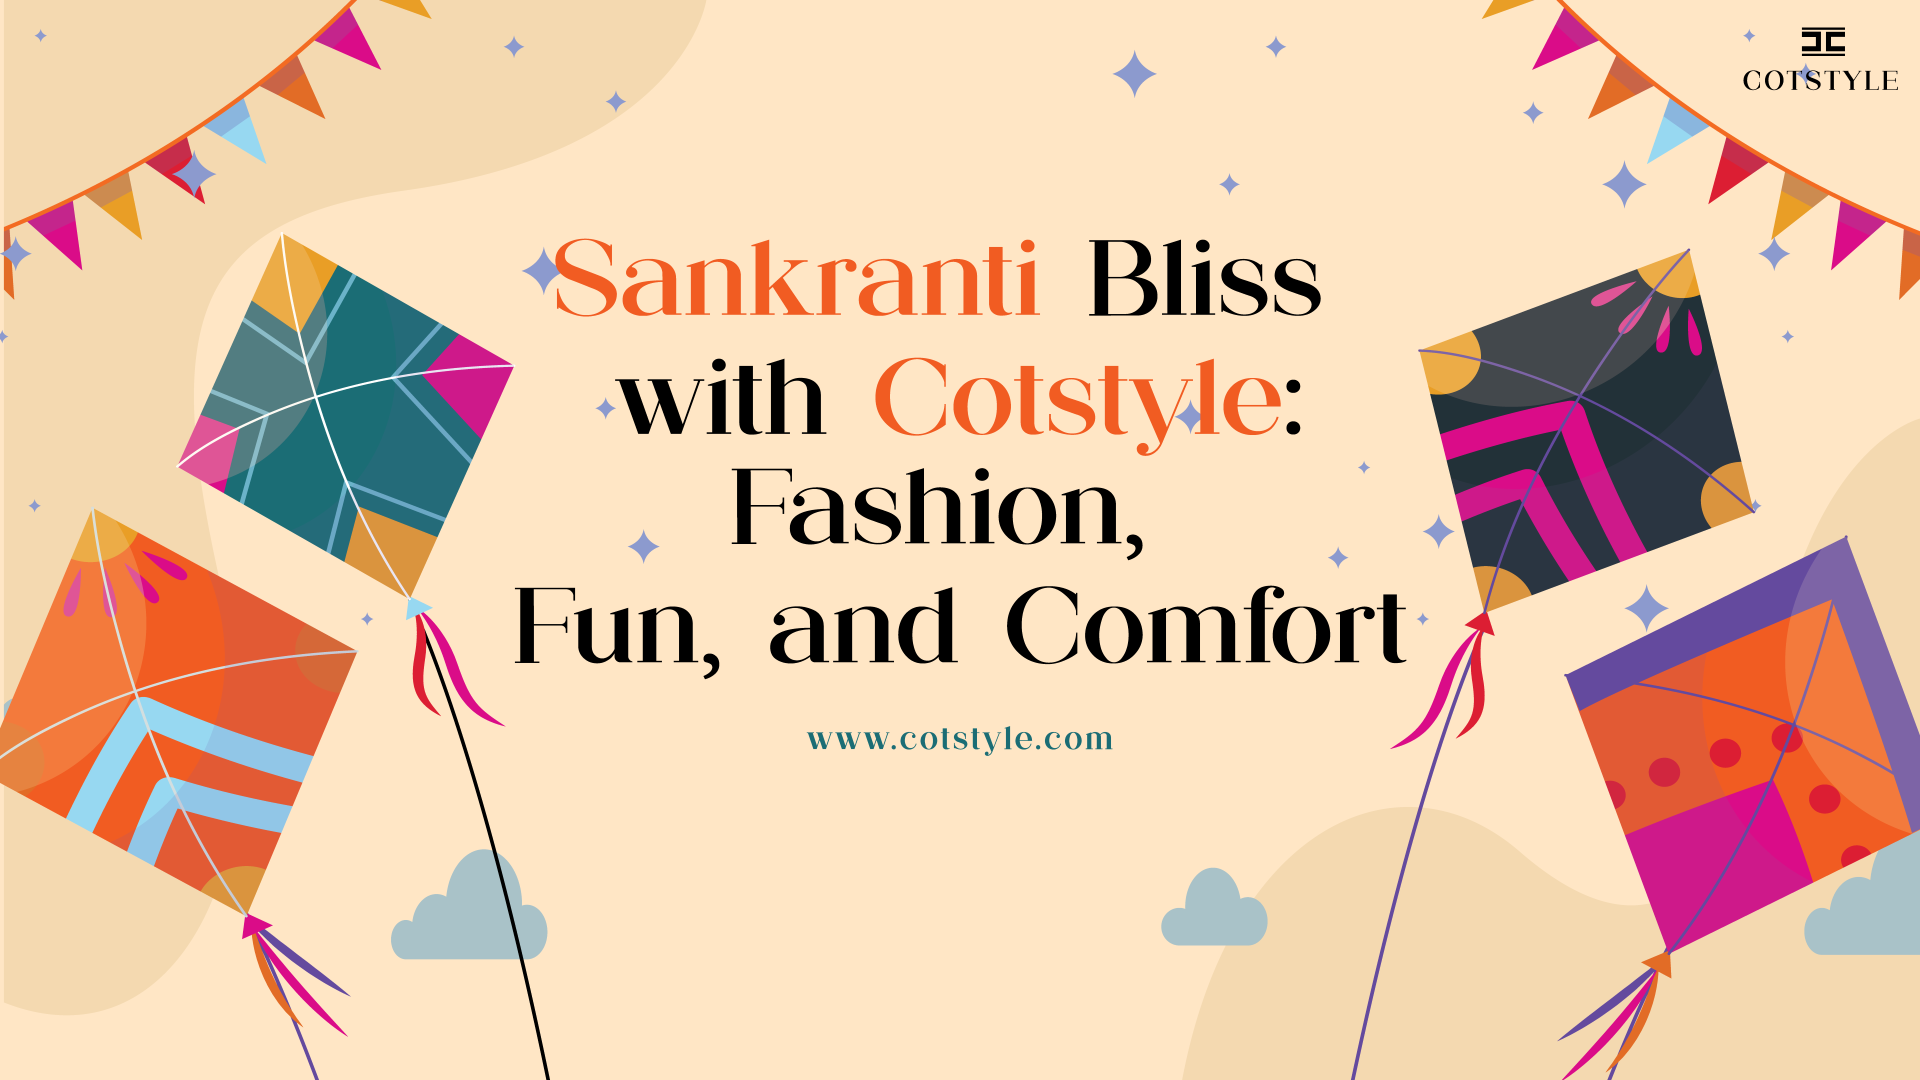 Sankranti Bliss with Cotstyle: Fashion, Fun, and Comfort